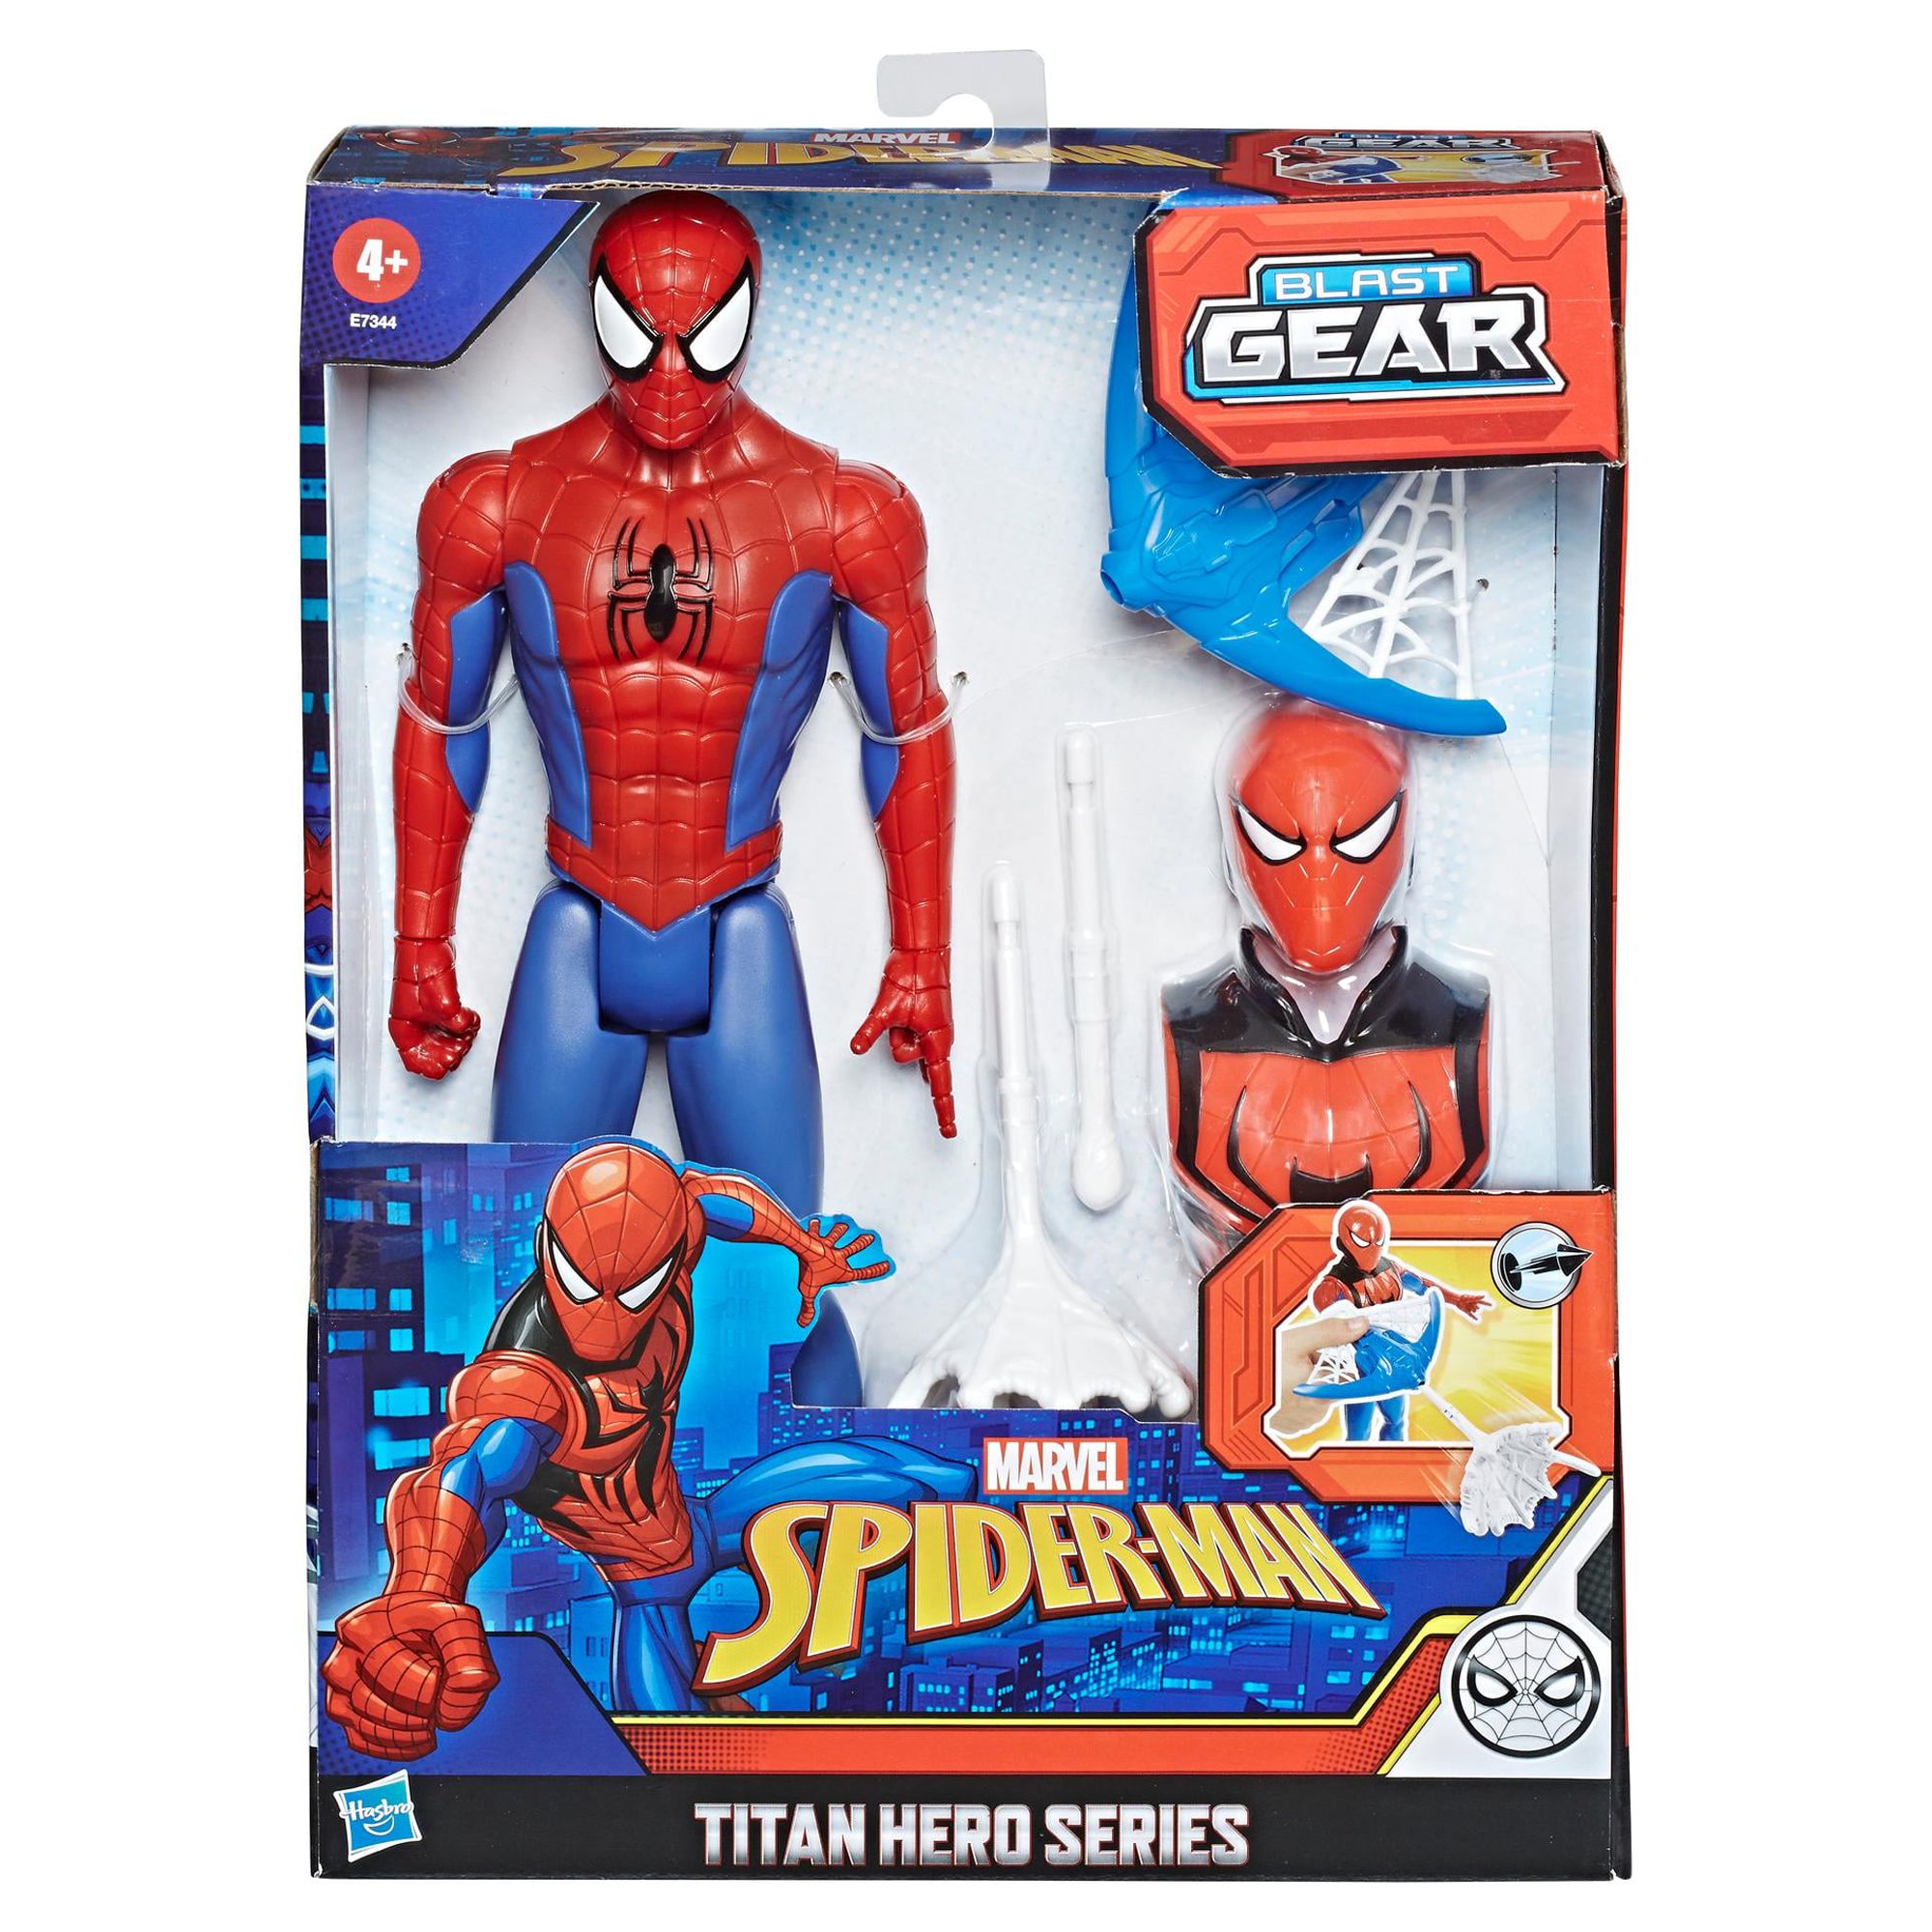 Marvel: Titan Hero Series Spiderman Blast Gear Kids Toy Action Figure for Boys and Girls with Launcher (9”) - image 3 of 12